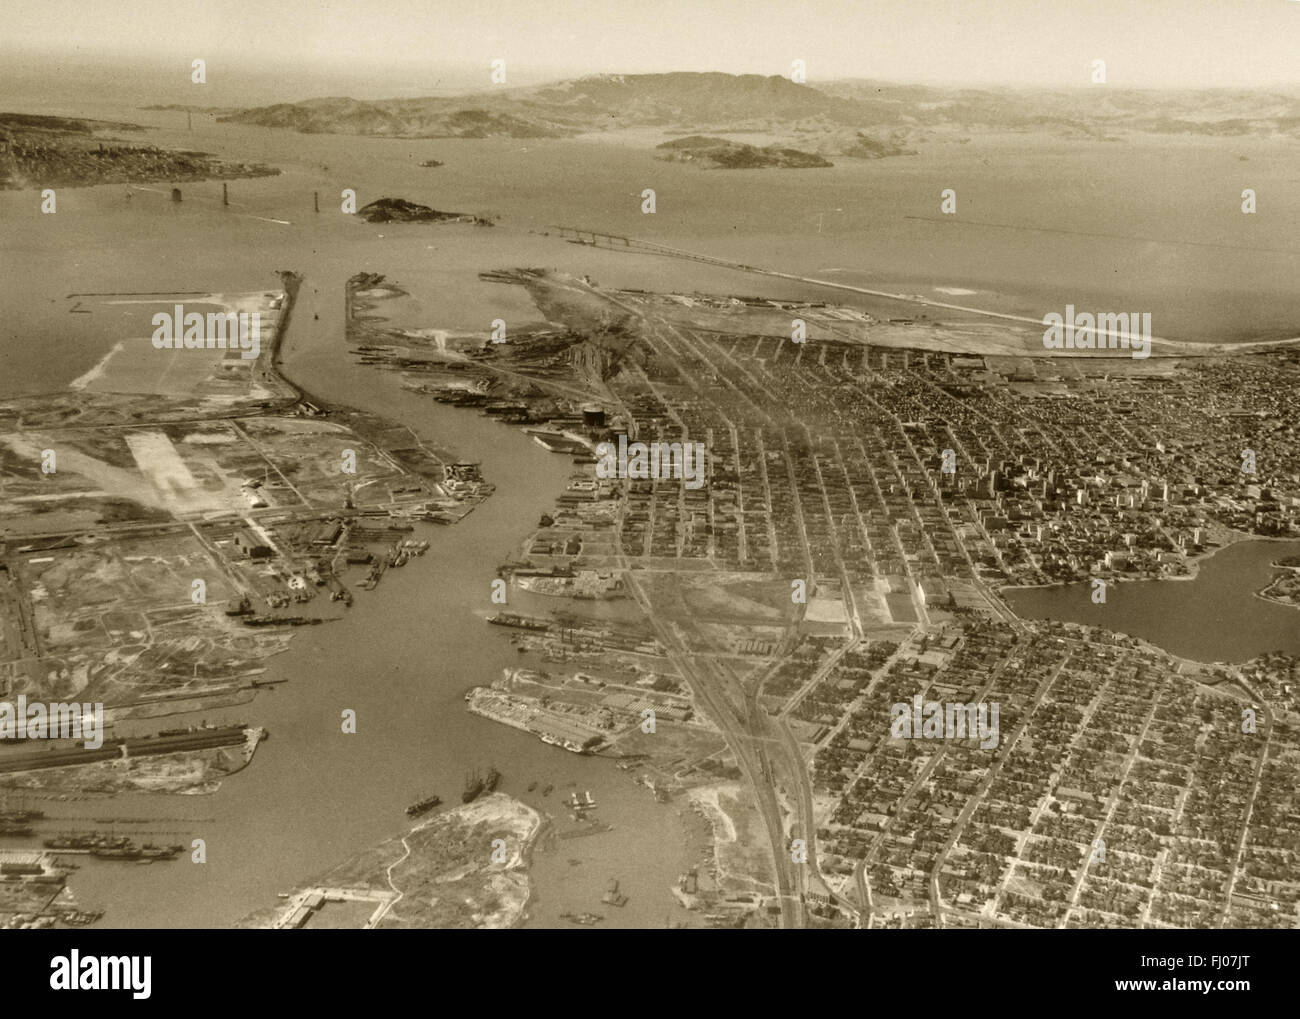 historical aerial photograph of Oakland, Alameda, Port of Oakland with Bay Bridge and Golden Gate Bridge under construction, California, 1935 Stock Photo